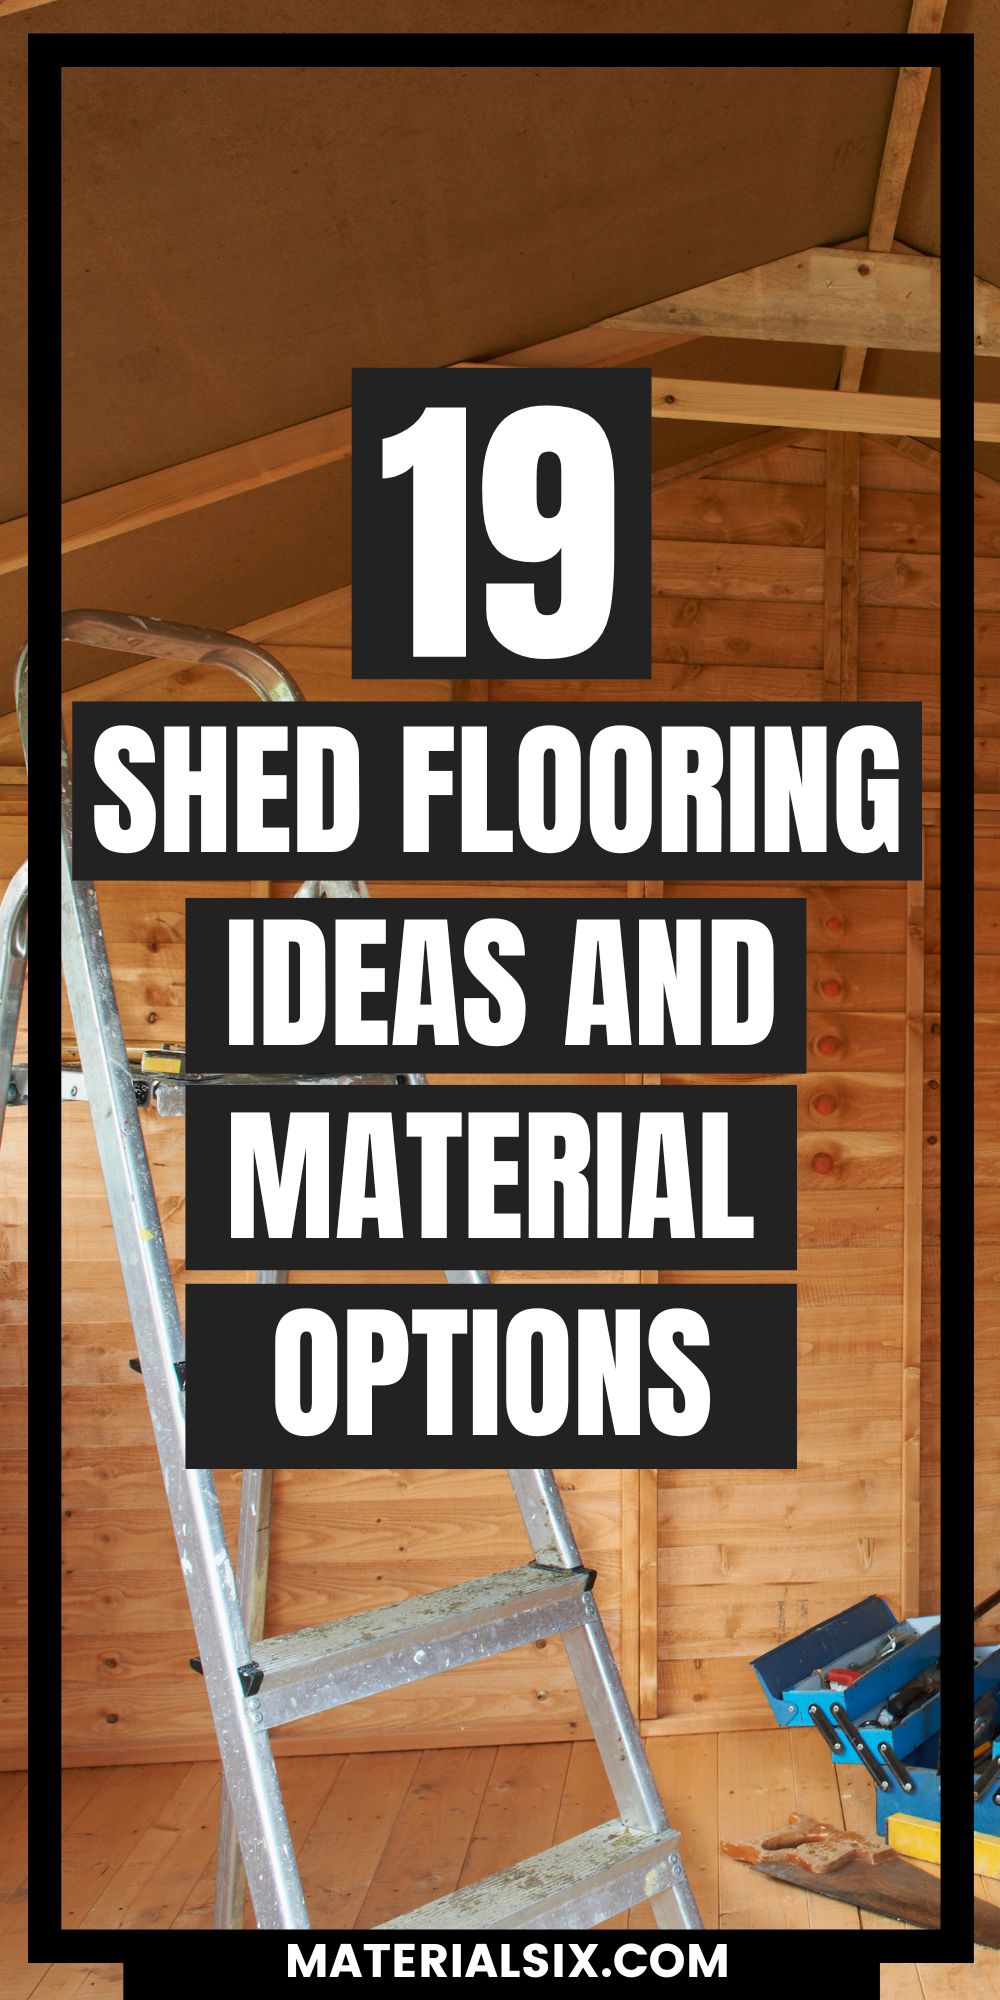 19 Shed Flooring Ideas and Material Options